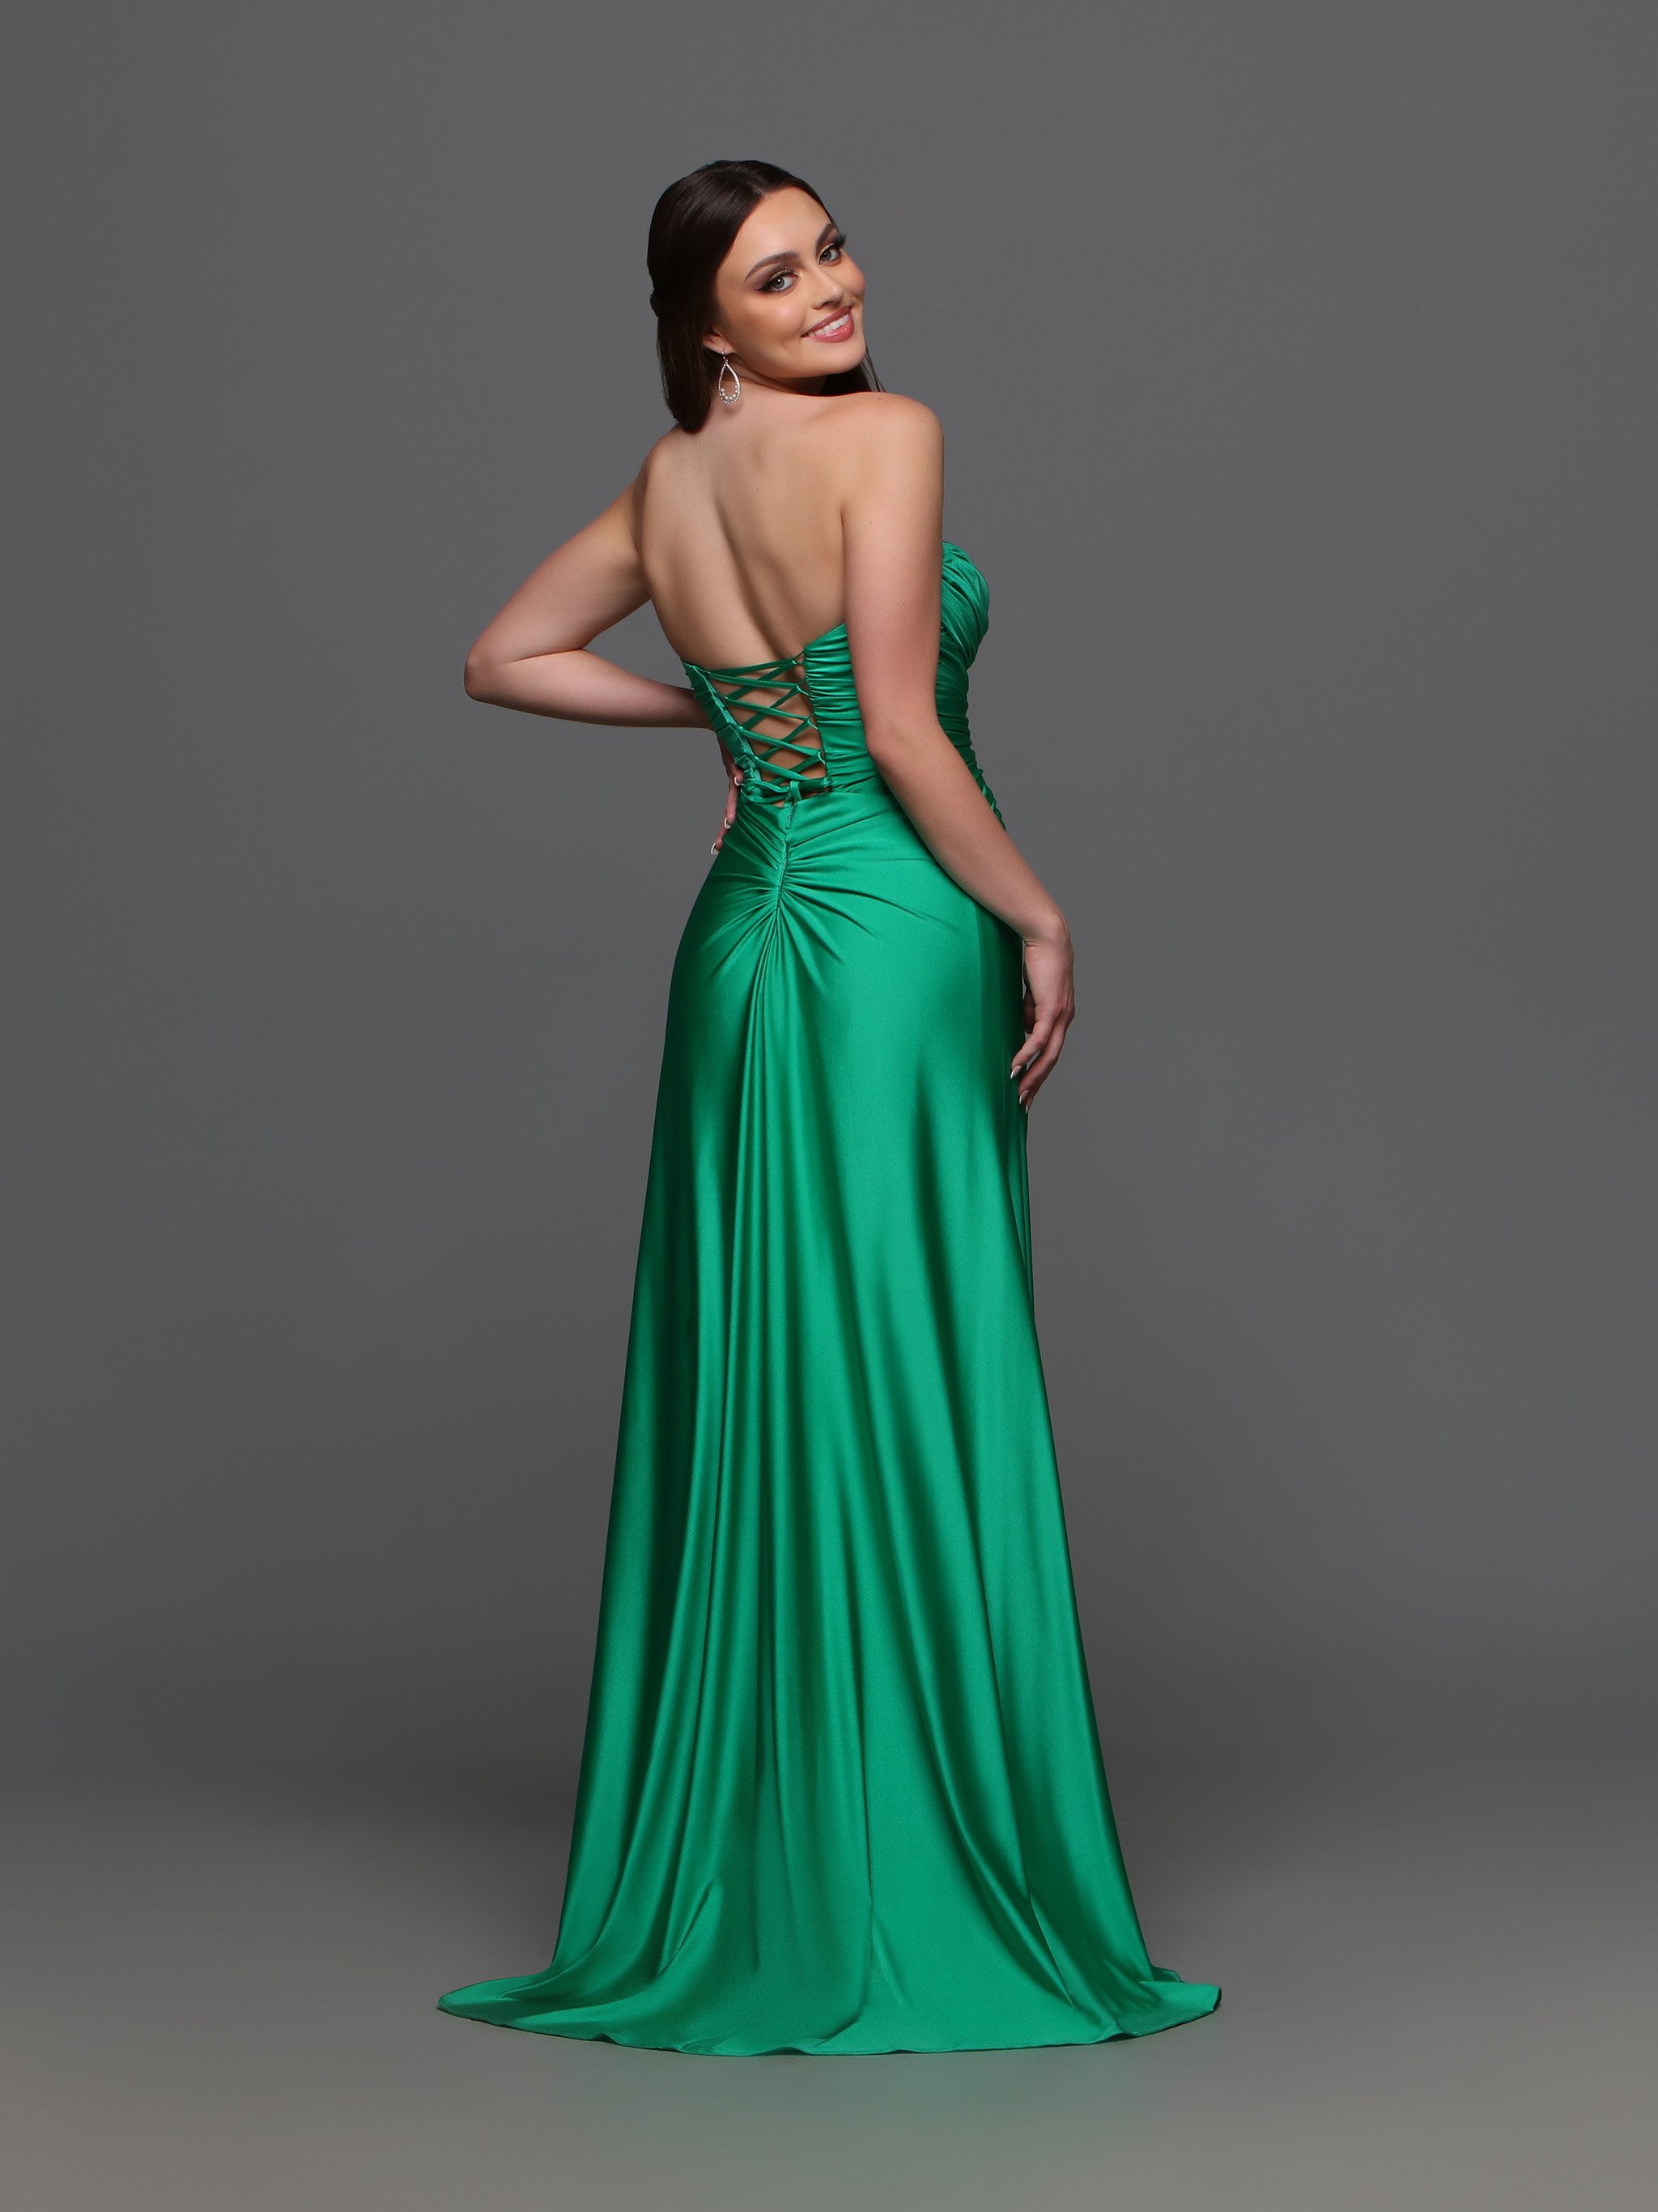 Image showing back view of style #72358